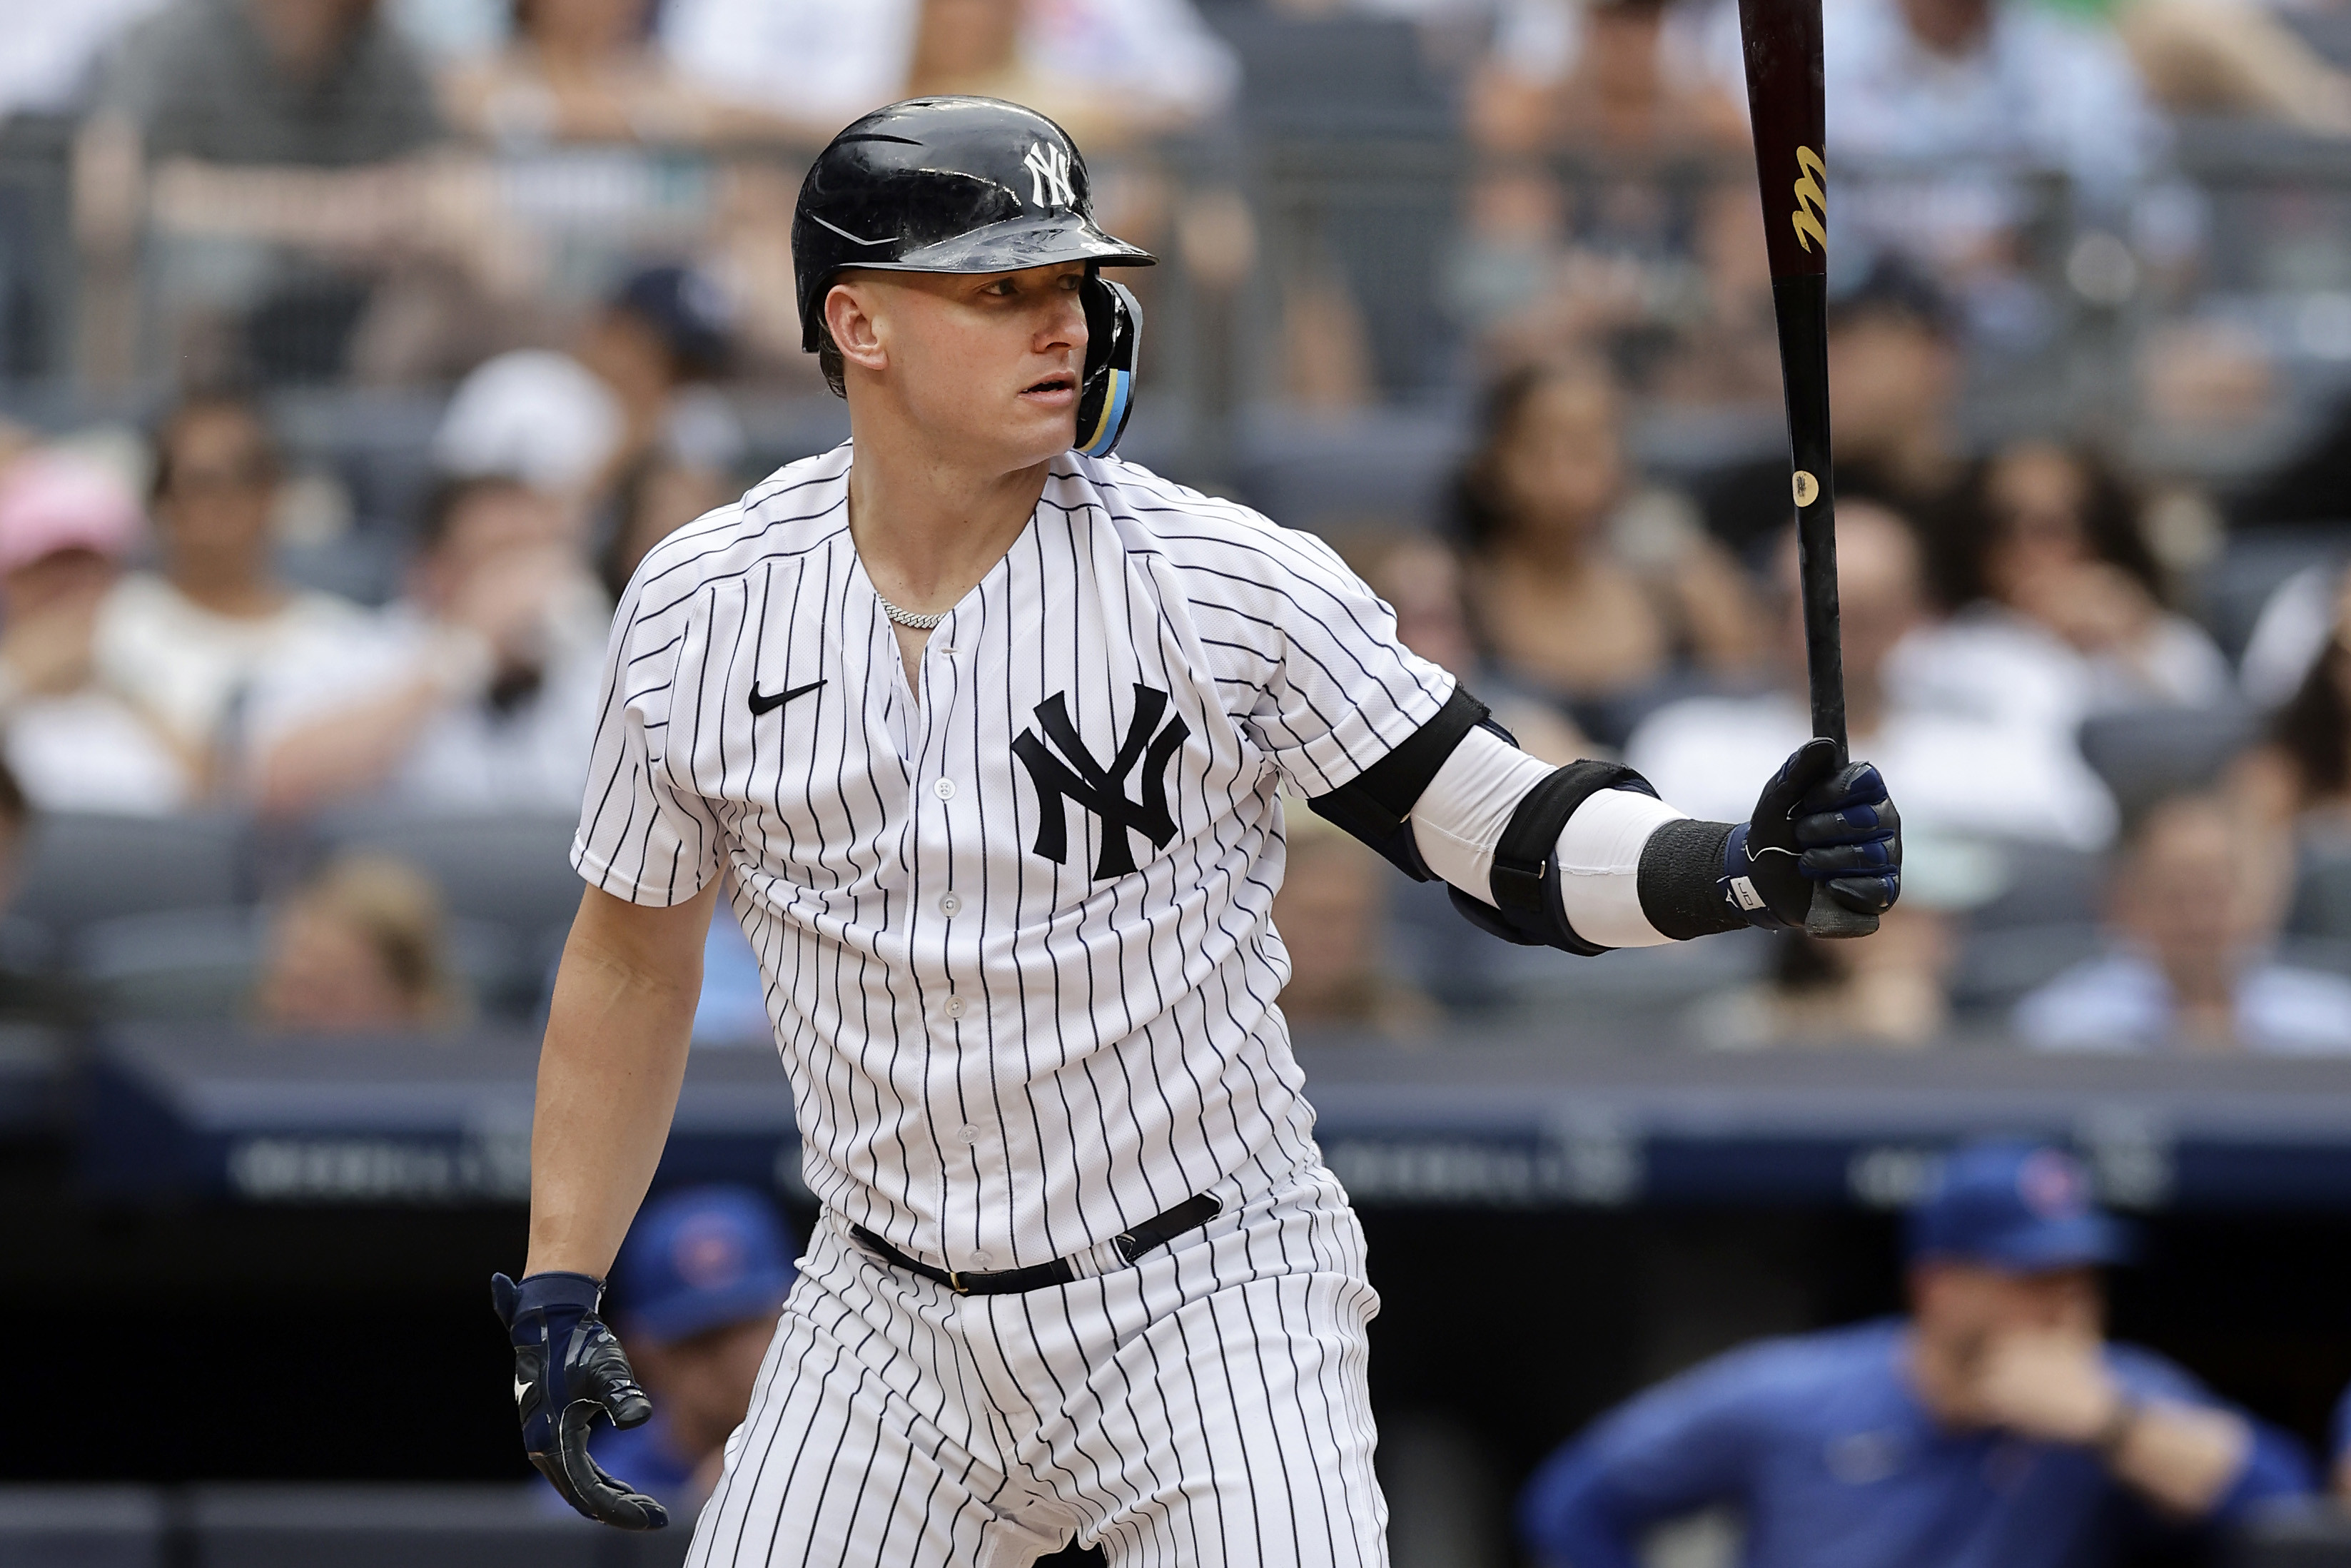 Retiring Giambi now a role model - especially for A-Rod